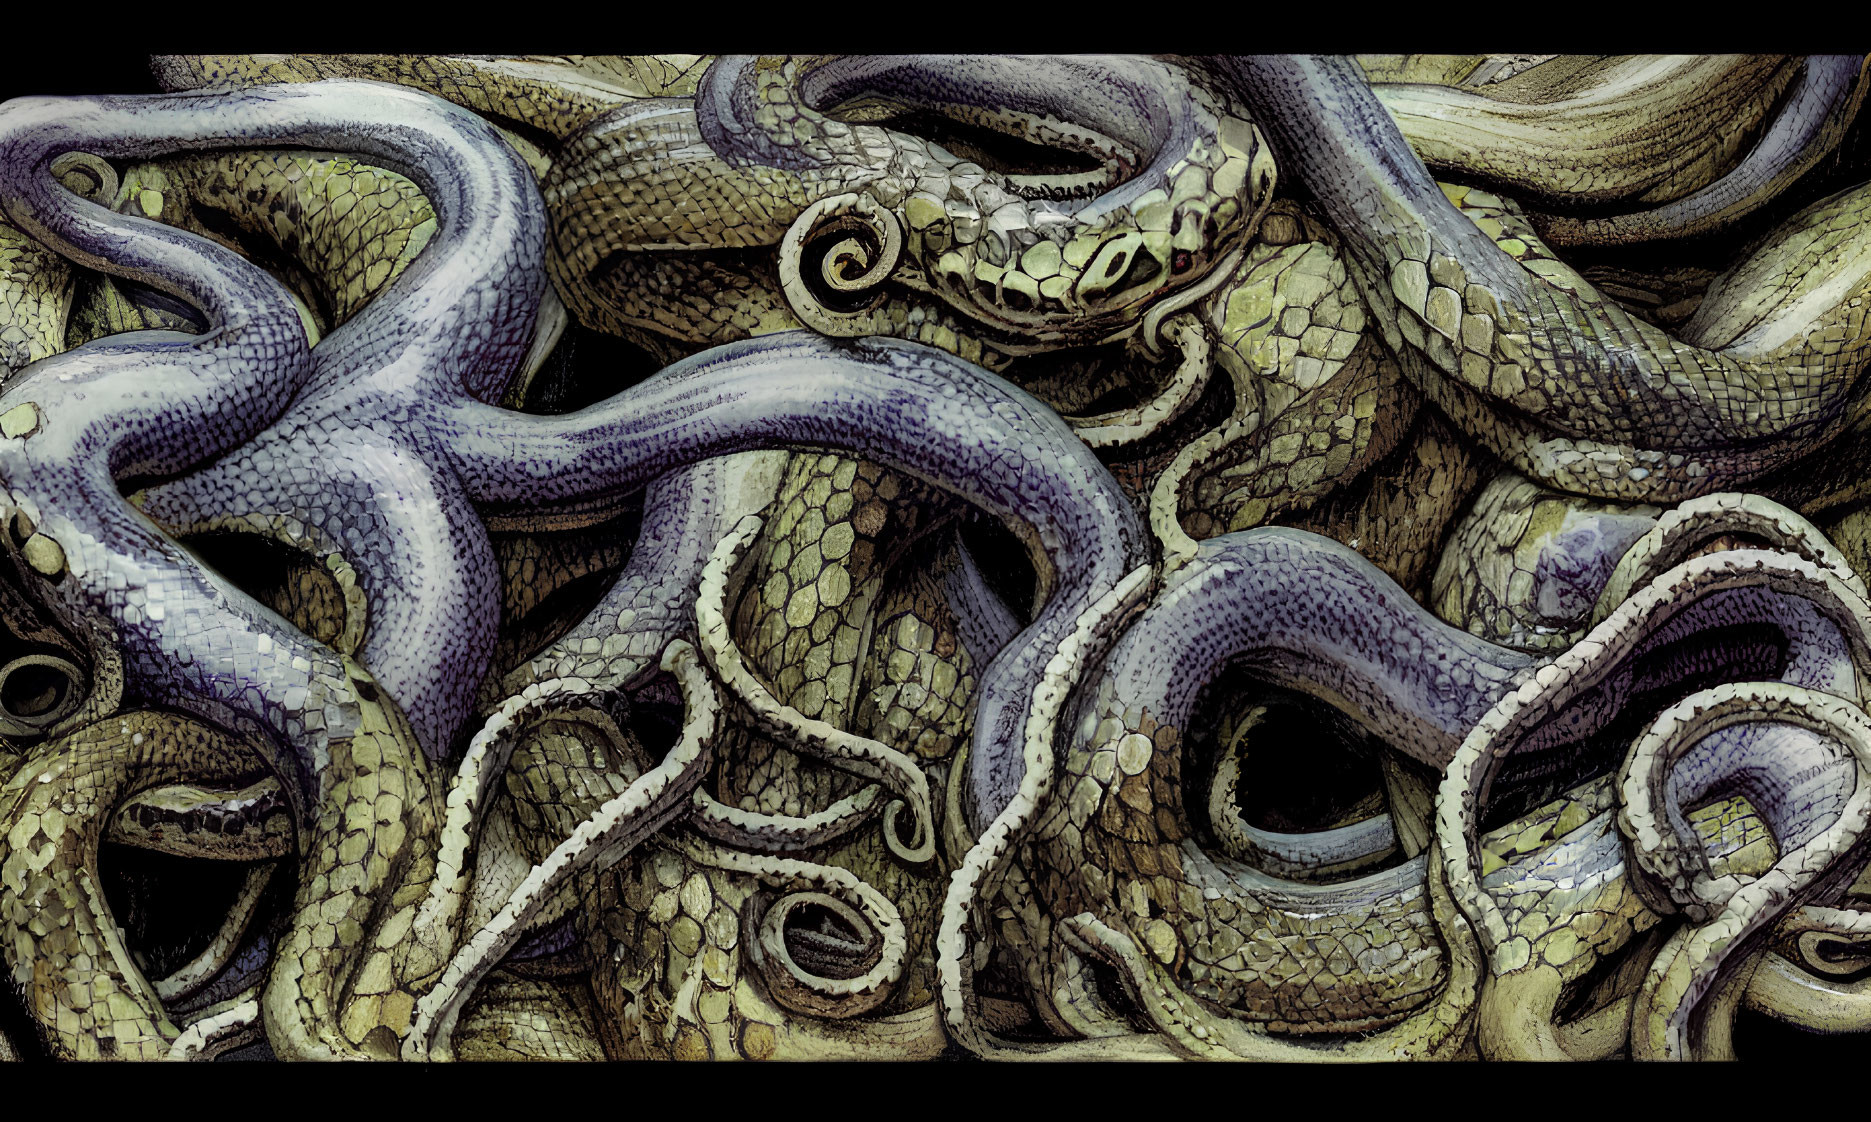 Intricate Artwork of Entwined Serpents and Tentacles in Purple and Beige